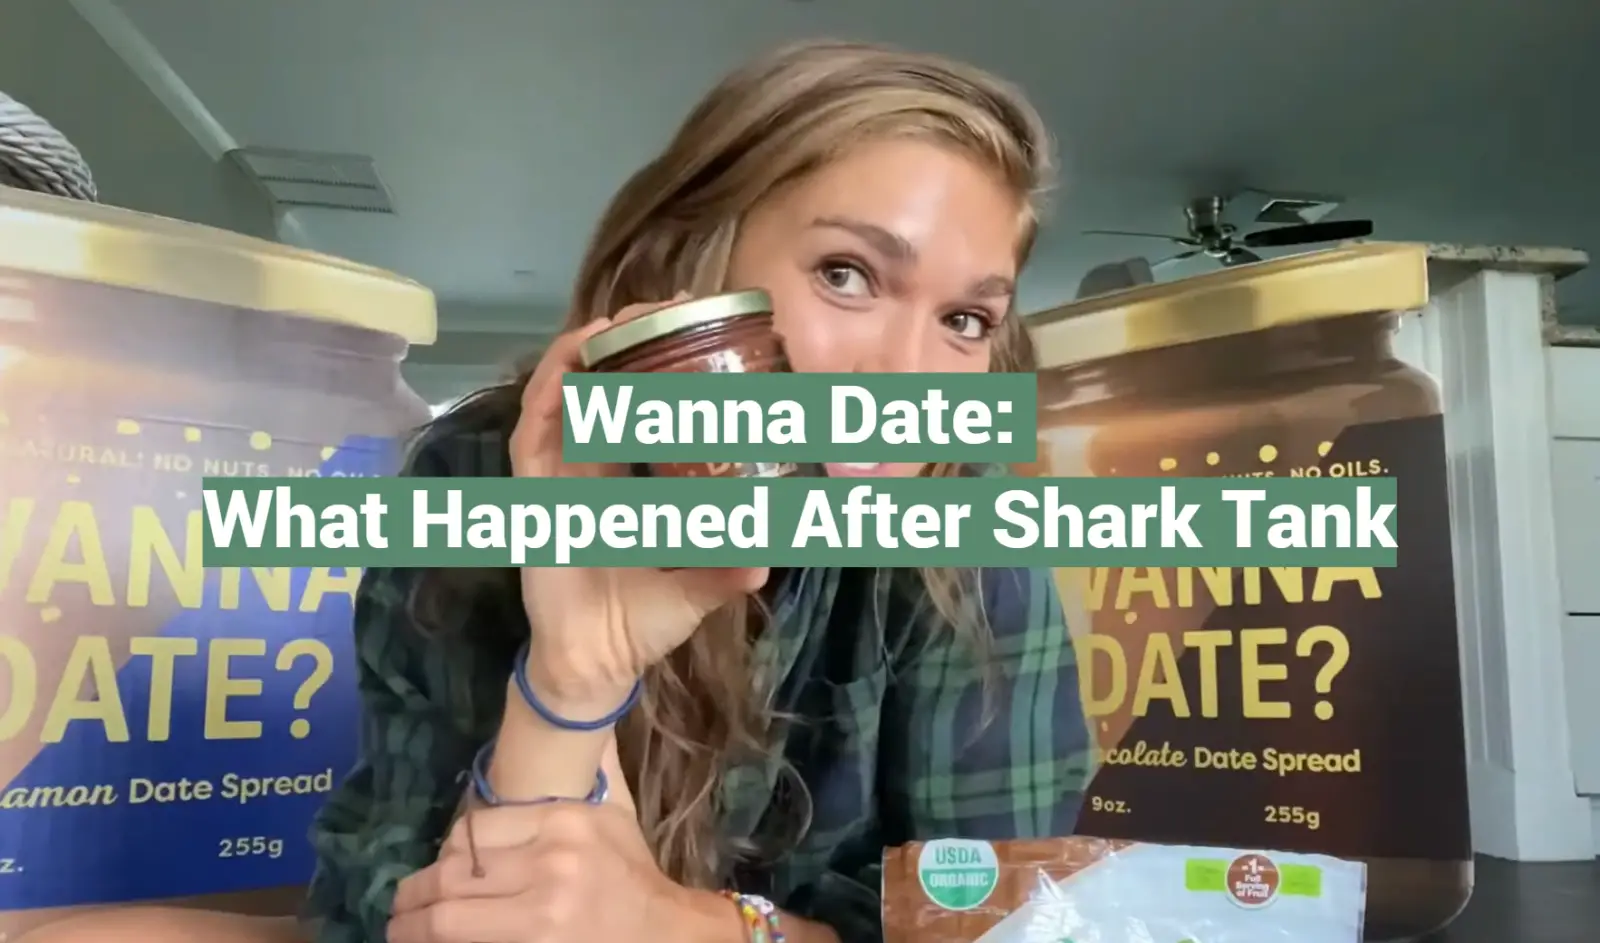 Wanna Date: What Happened After Shark Tank